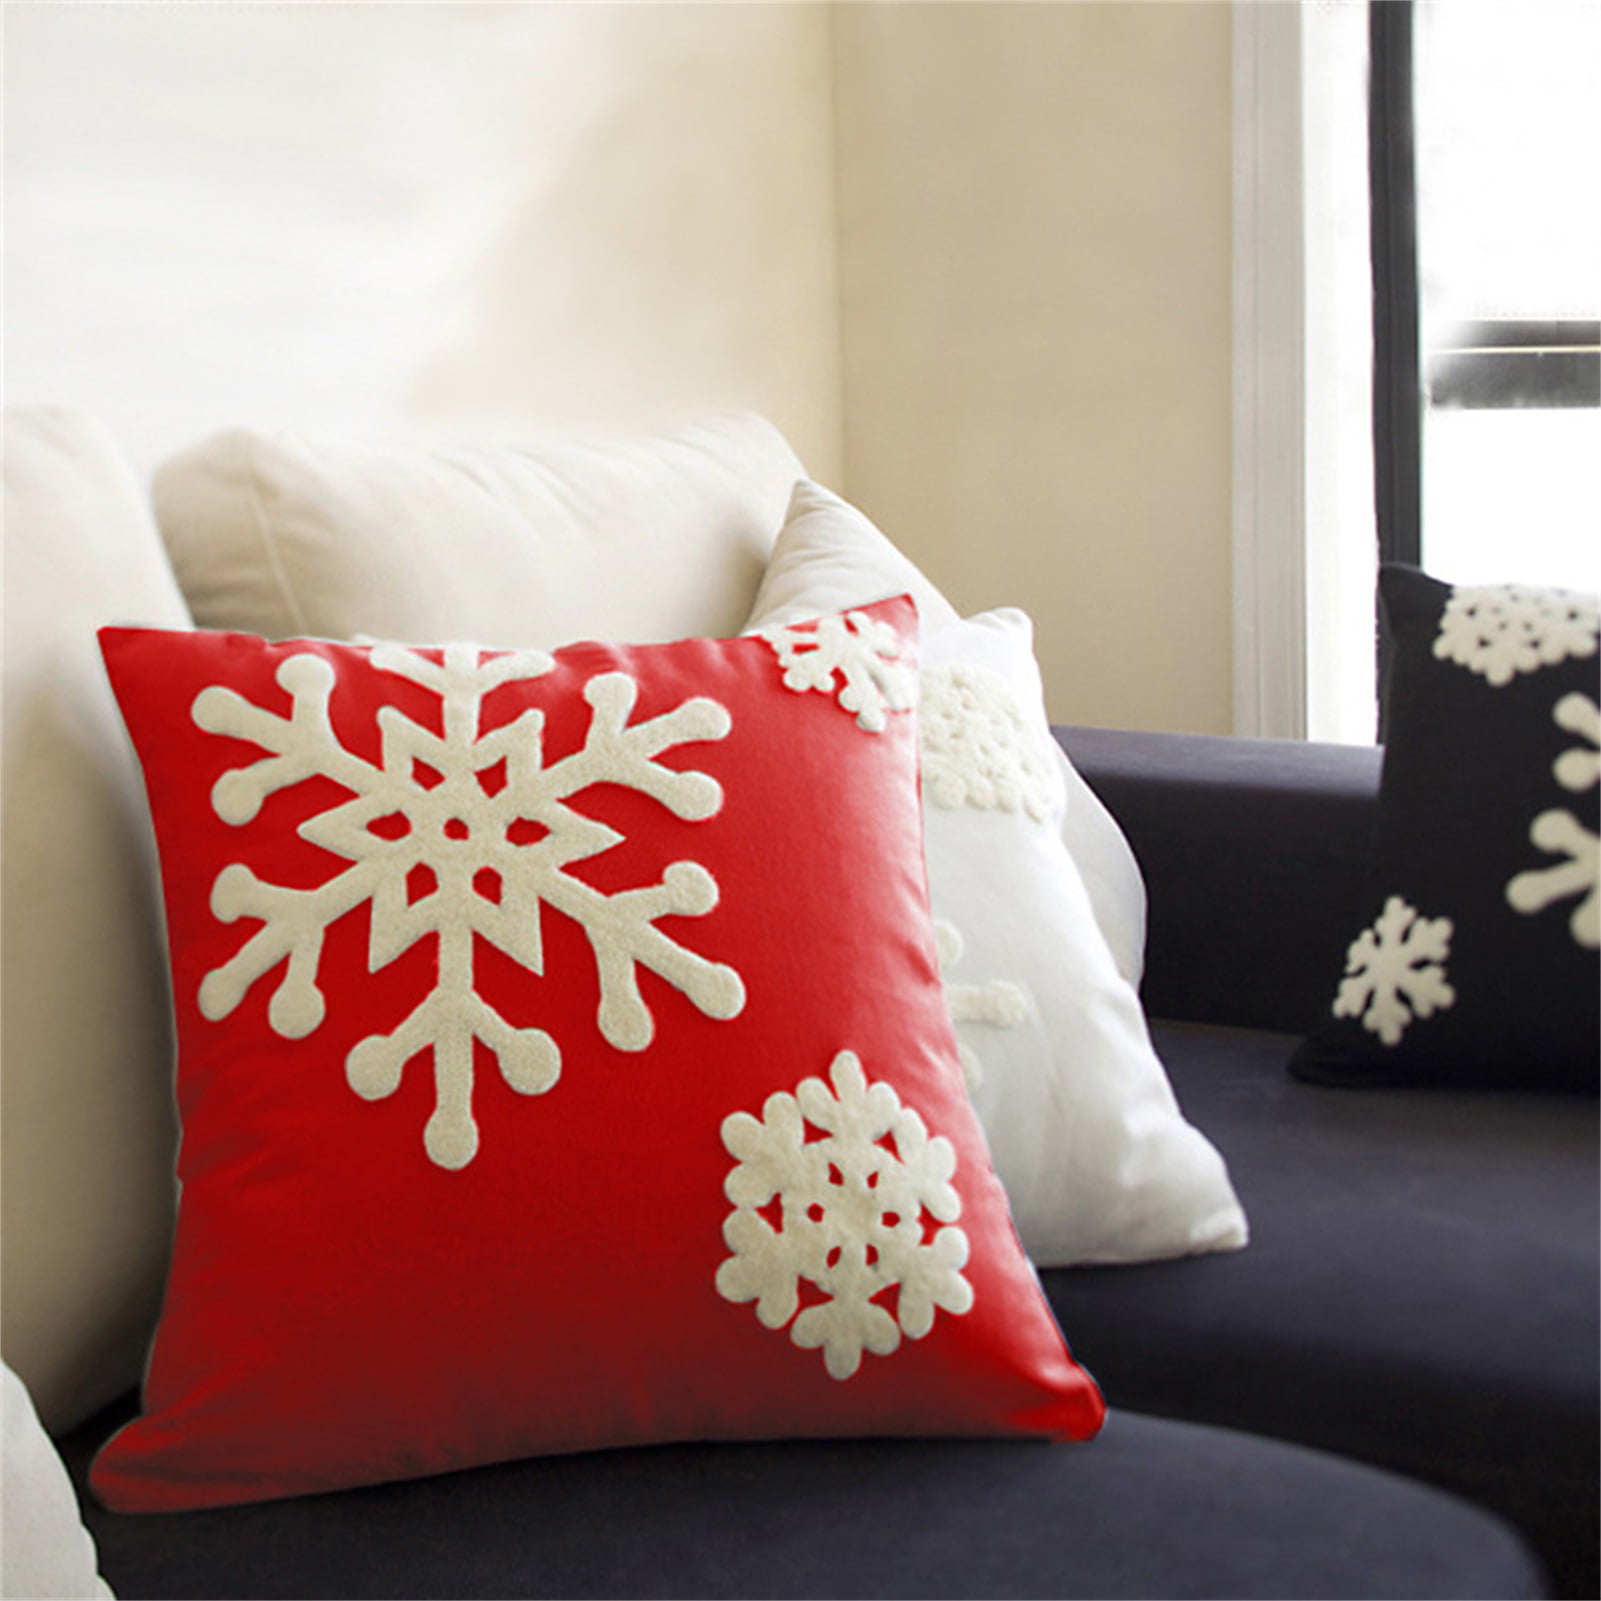 Ivory Laser Cut Wool Christmas Snowflake Decorative Throw Pillow Cover  23x23 + Reviews